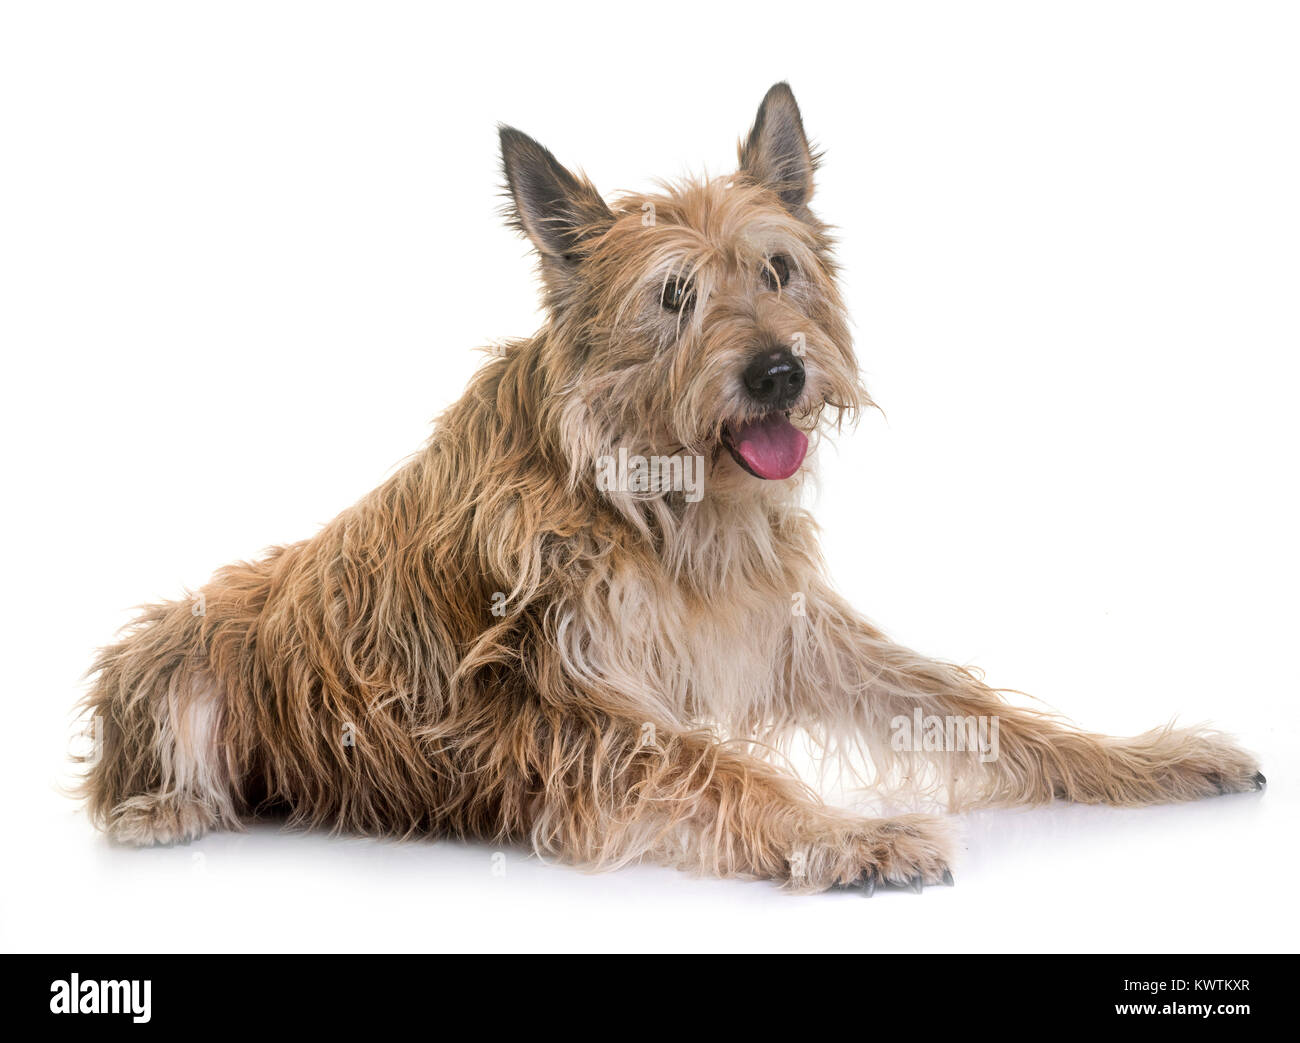 picardy shepherd in front of white background Stock Photo